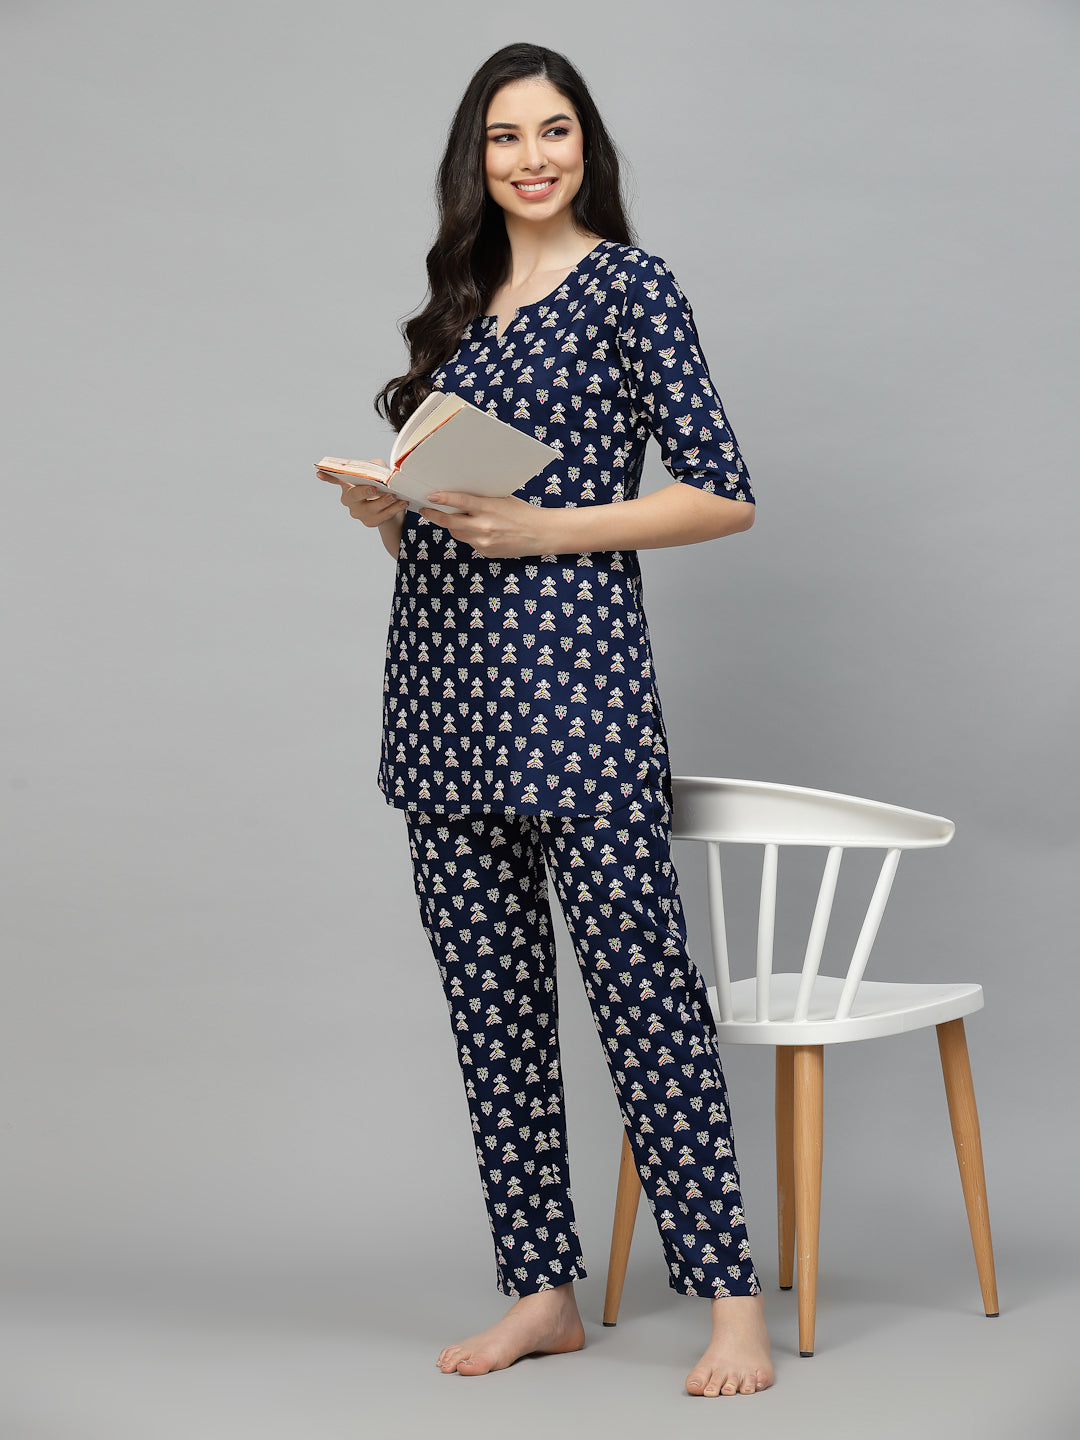 Quirky Printed Rayon Night Suit